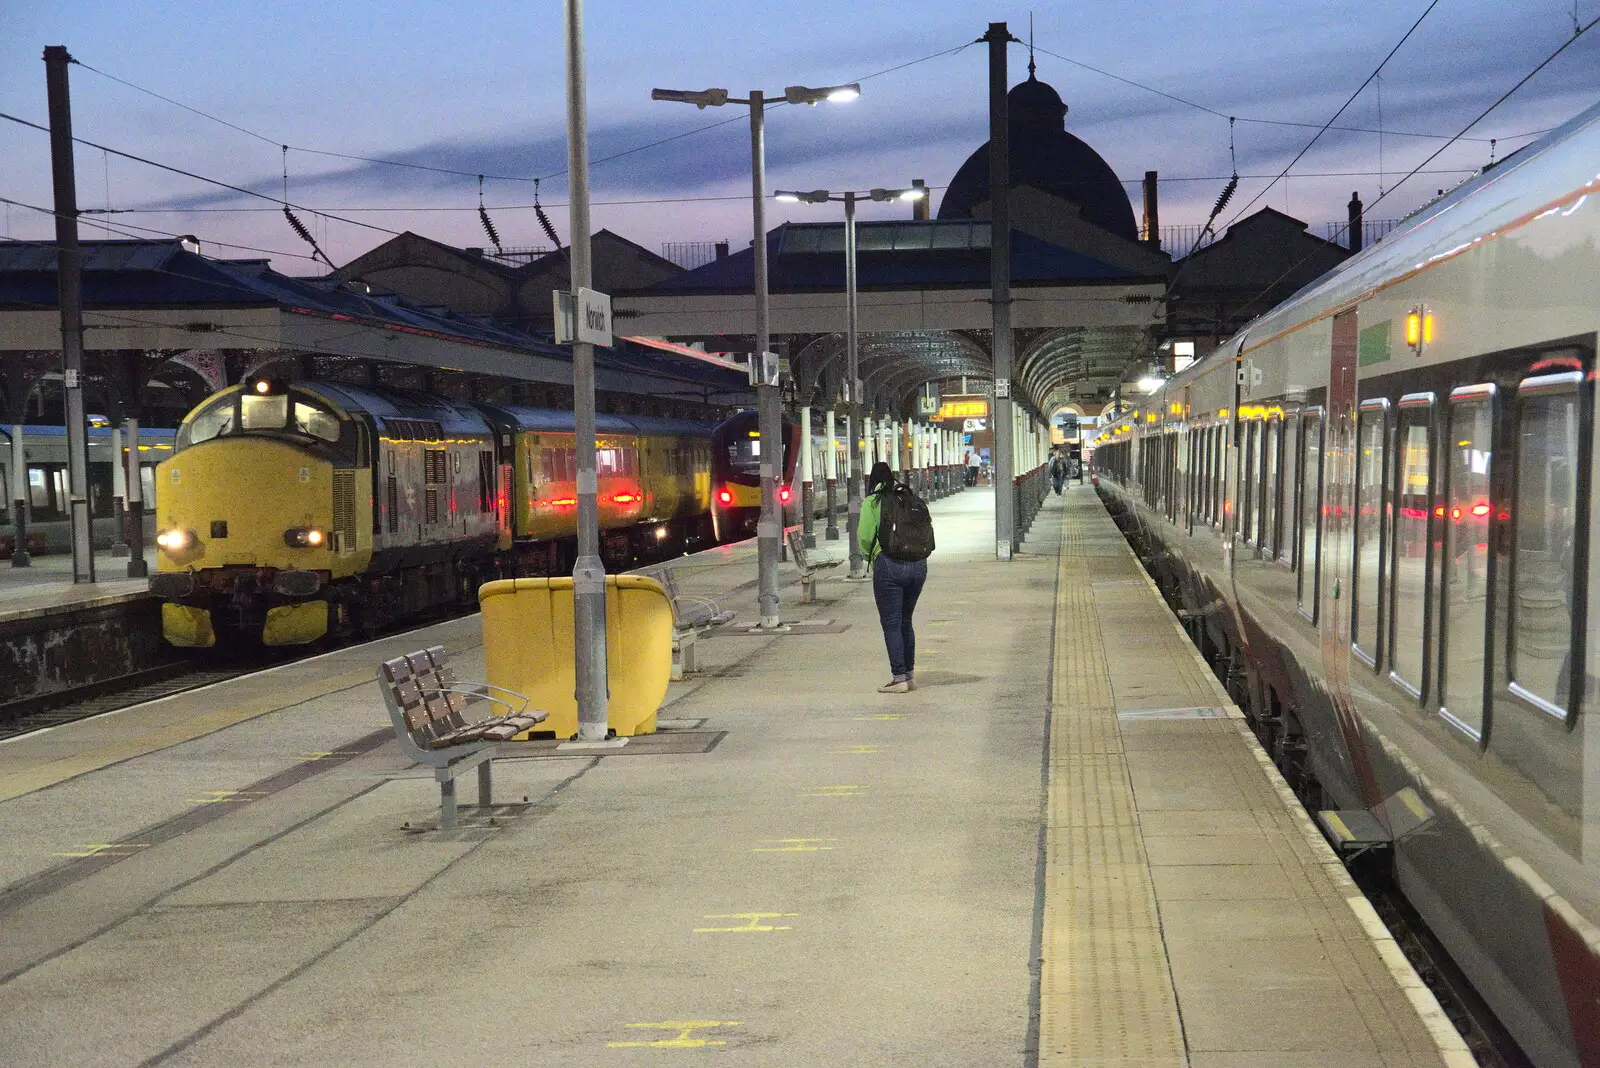 Platforms 3 and 4 at Norwich, by night, from A Trip to Nando's, Riverside, Norwich, Norfolk - 23rd July 2021